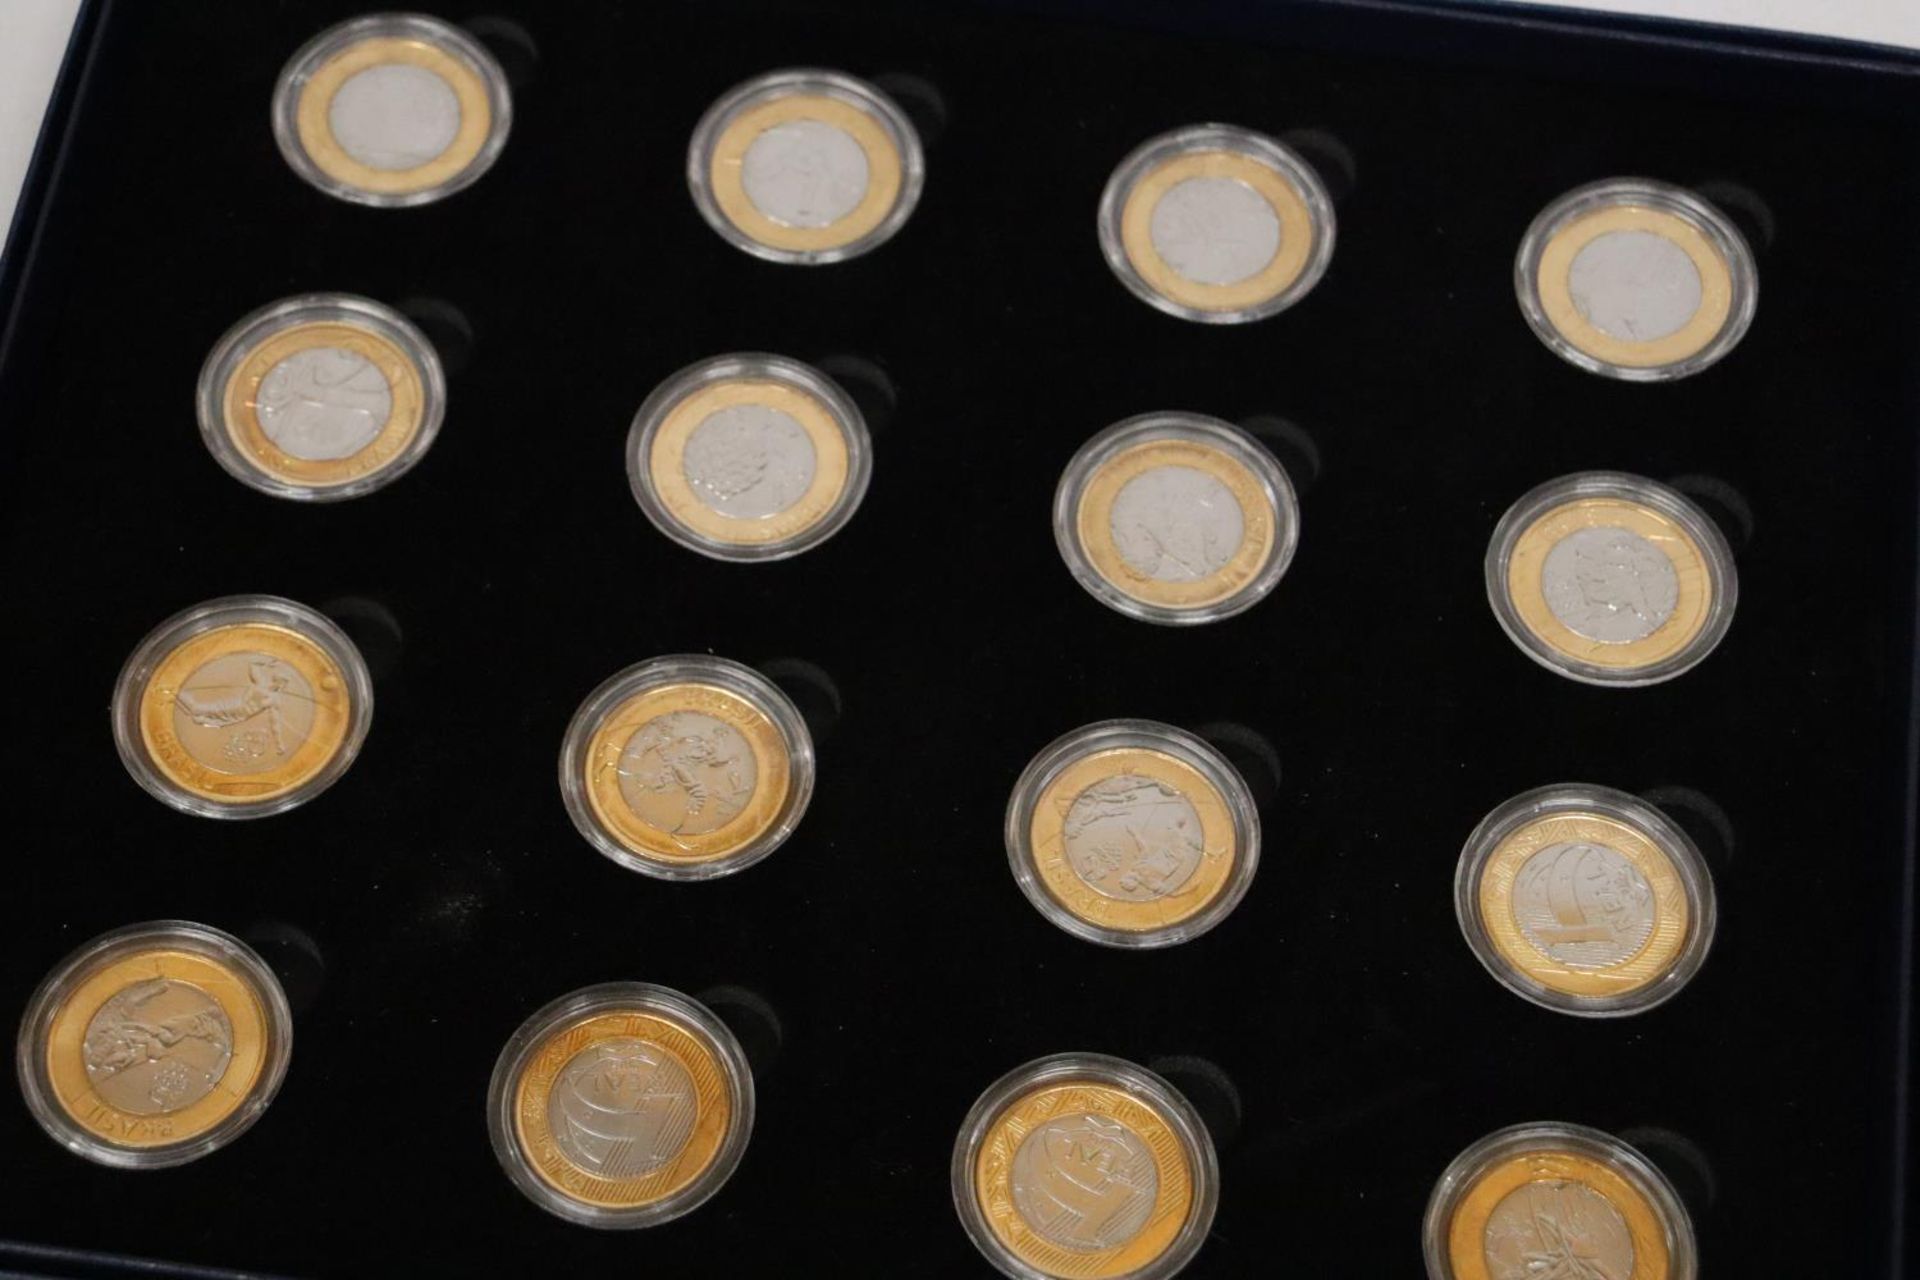 BRAZIL, THE 2016 RIO GAMES SET OF 16, 1 REAL COINS , DISPLAYED IN CASE, EACH WITH COA - Bild 2 aus 4